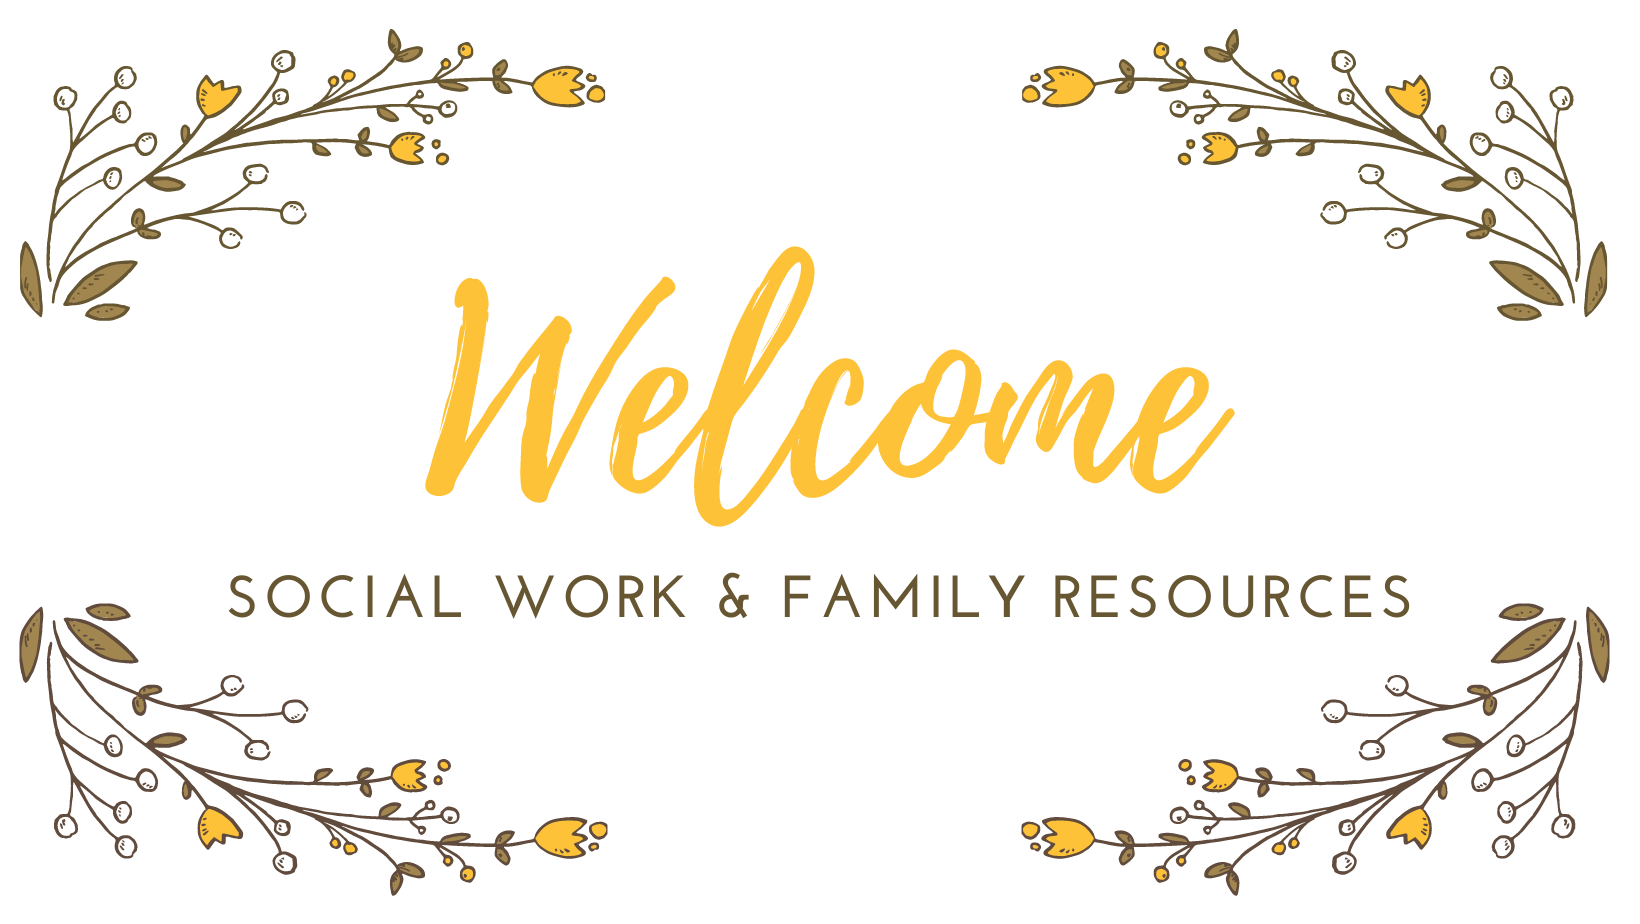 SOCIAL WORK & FAMILY RESOURCES